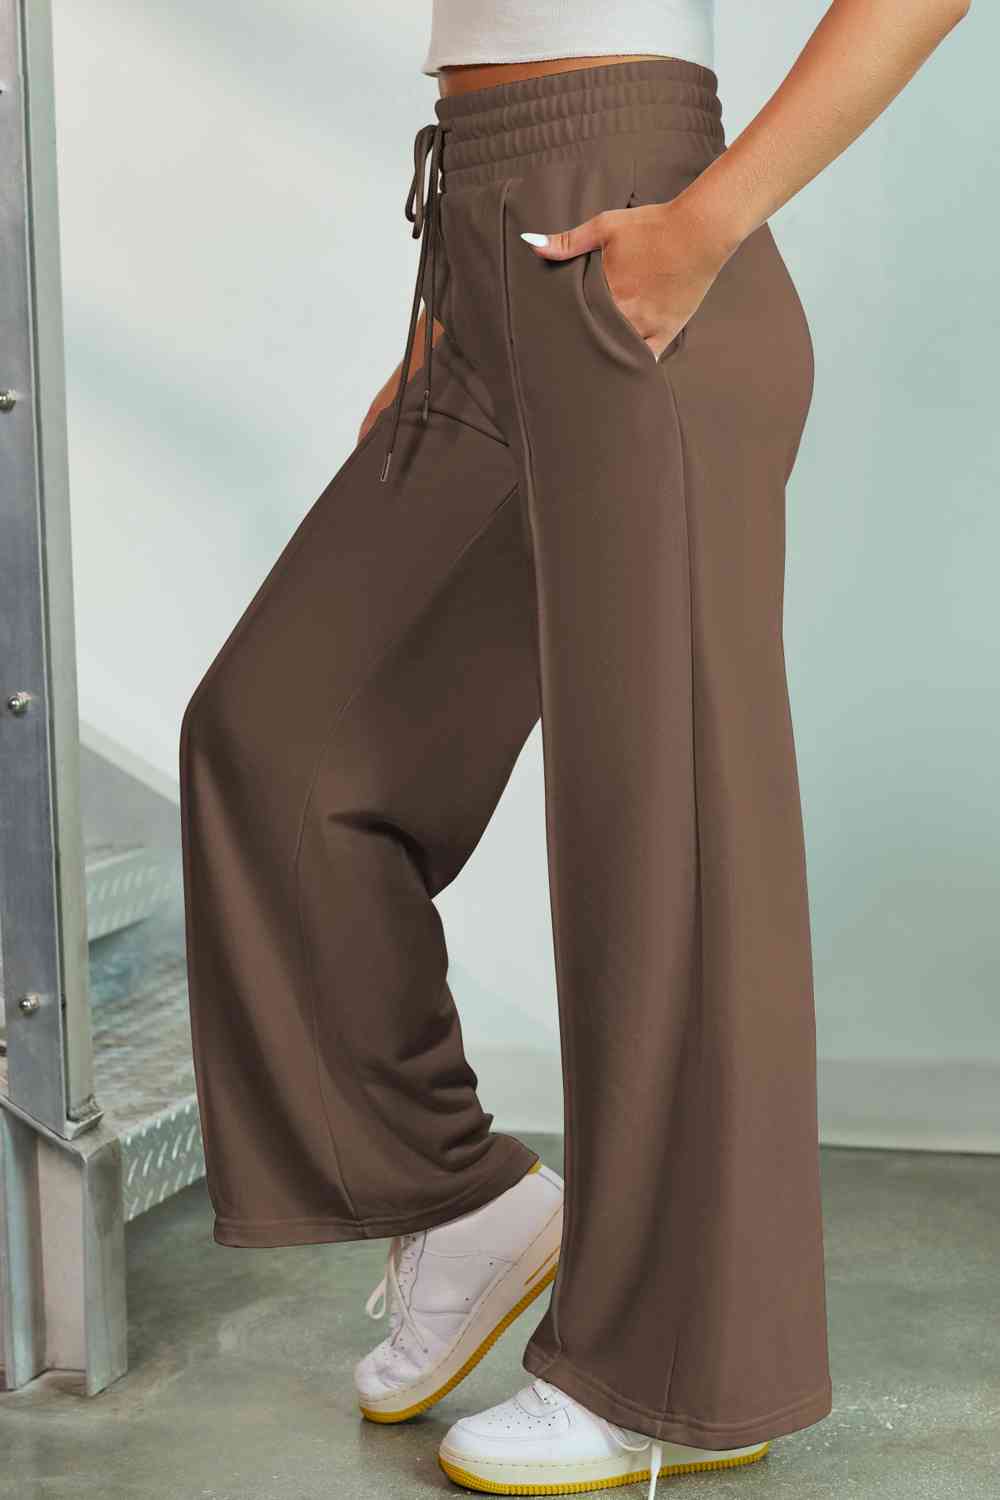 Light Slate Gray Drawstring Wide Leg Pants with Pockets Sentient Beauty Fashions Apparel &amp; Accessories